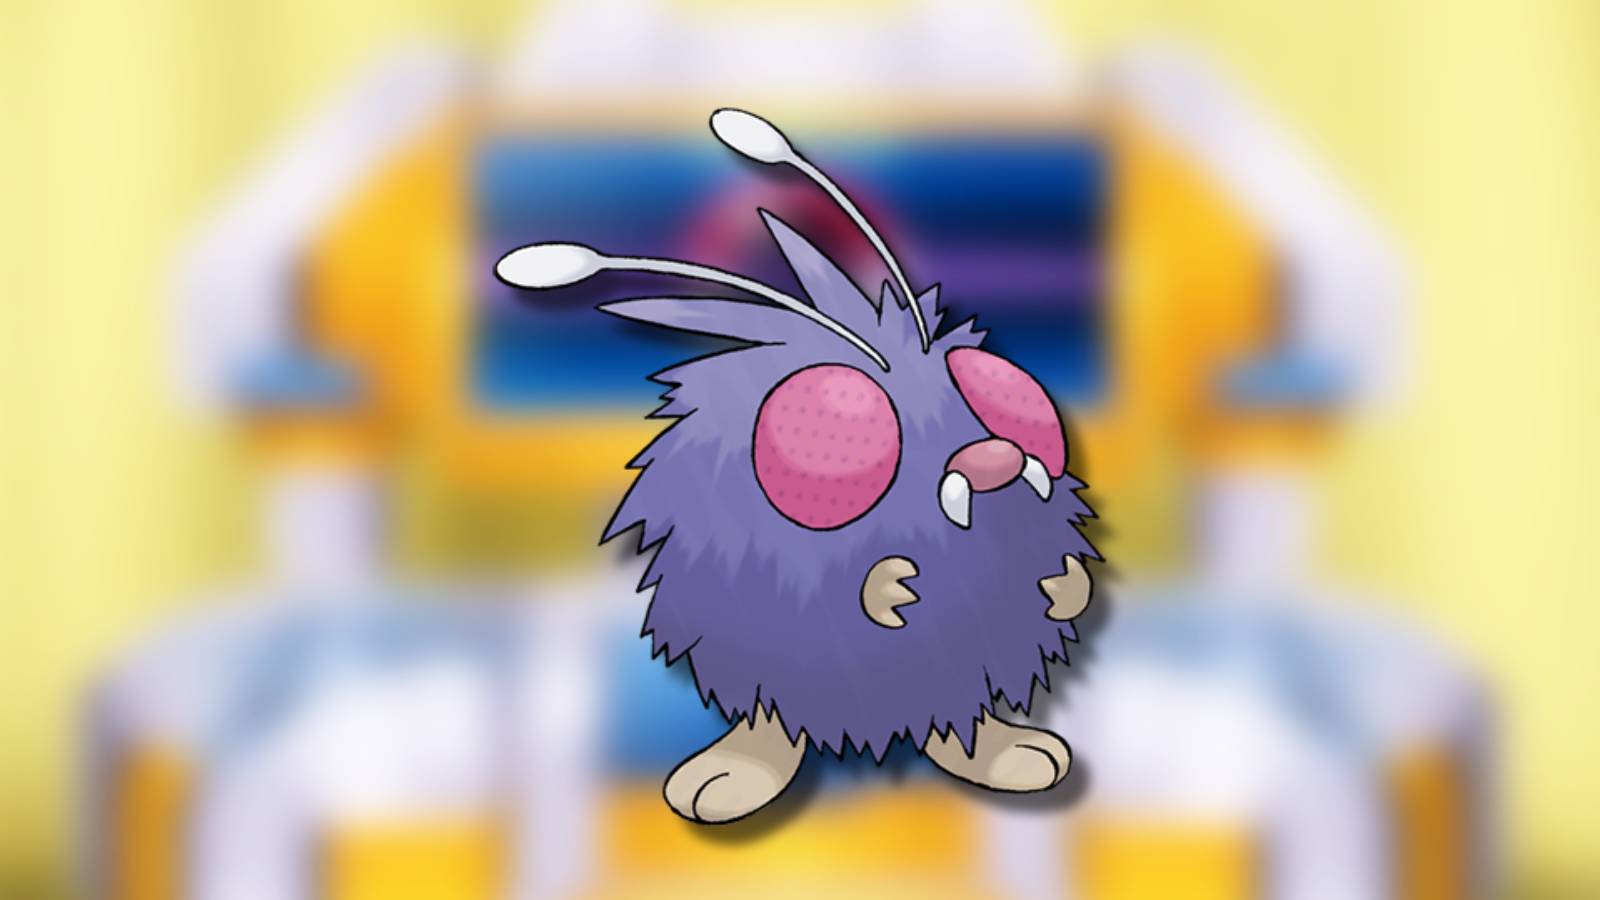 The Pokemon Venonat appears against a blurred background